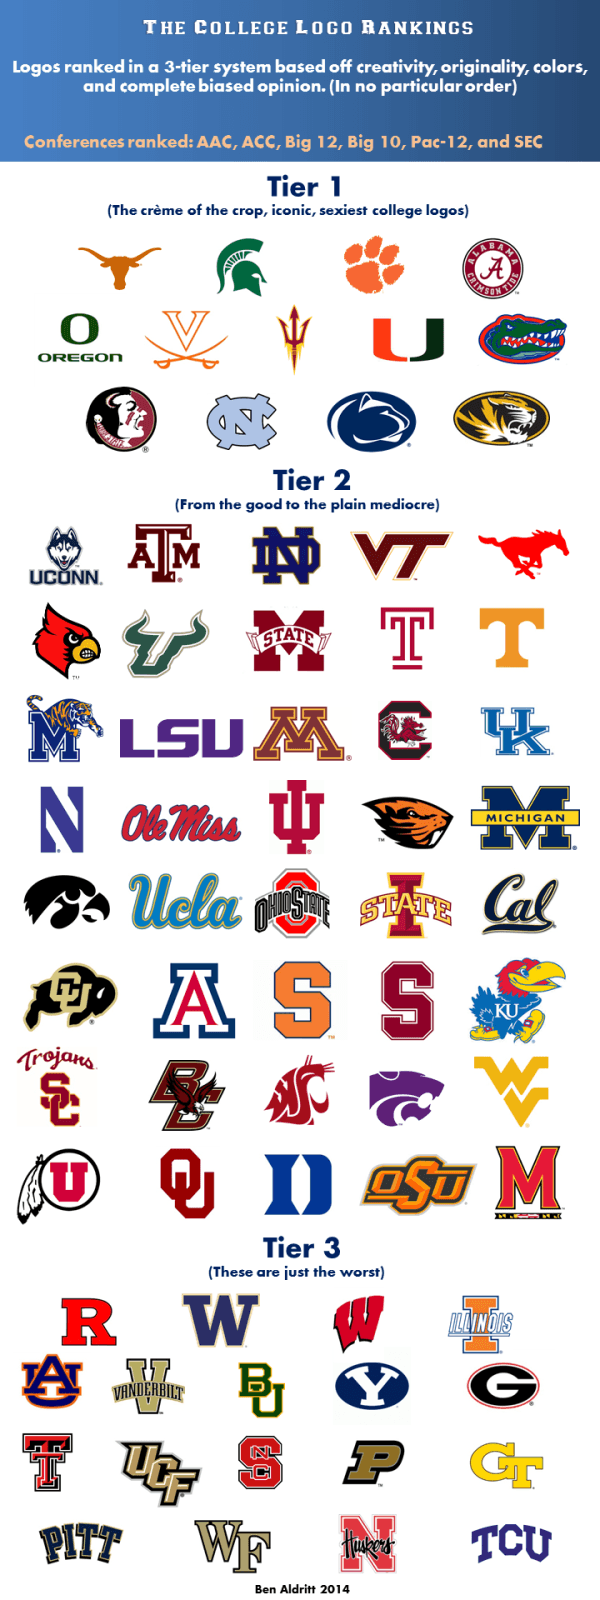 Most Popular College Logo - The College Logo Rankings. CycloneFanatic: The Internet's most